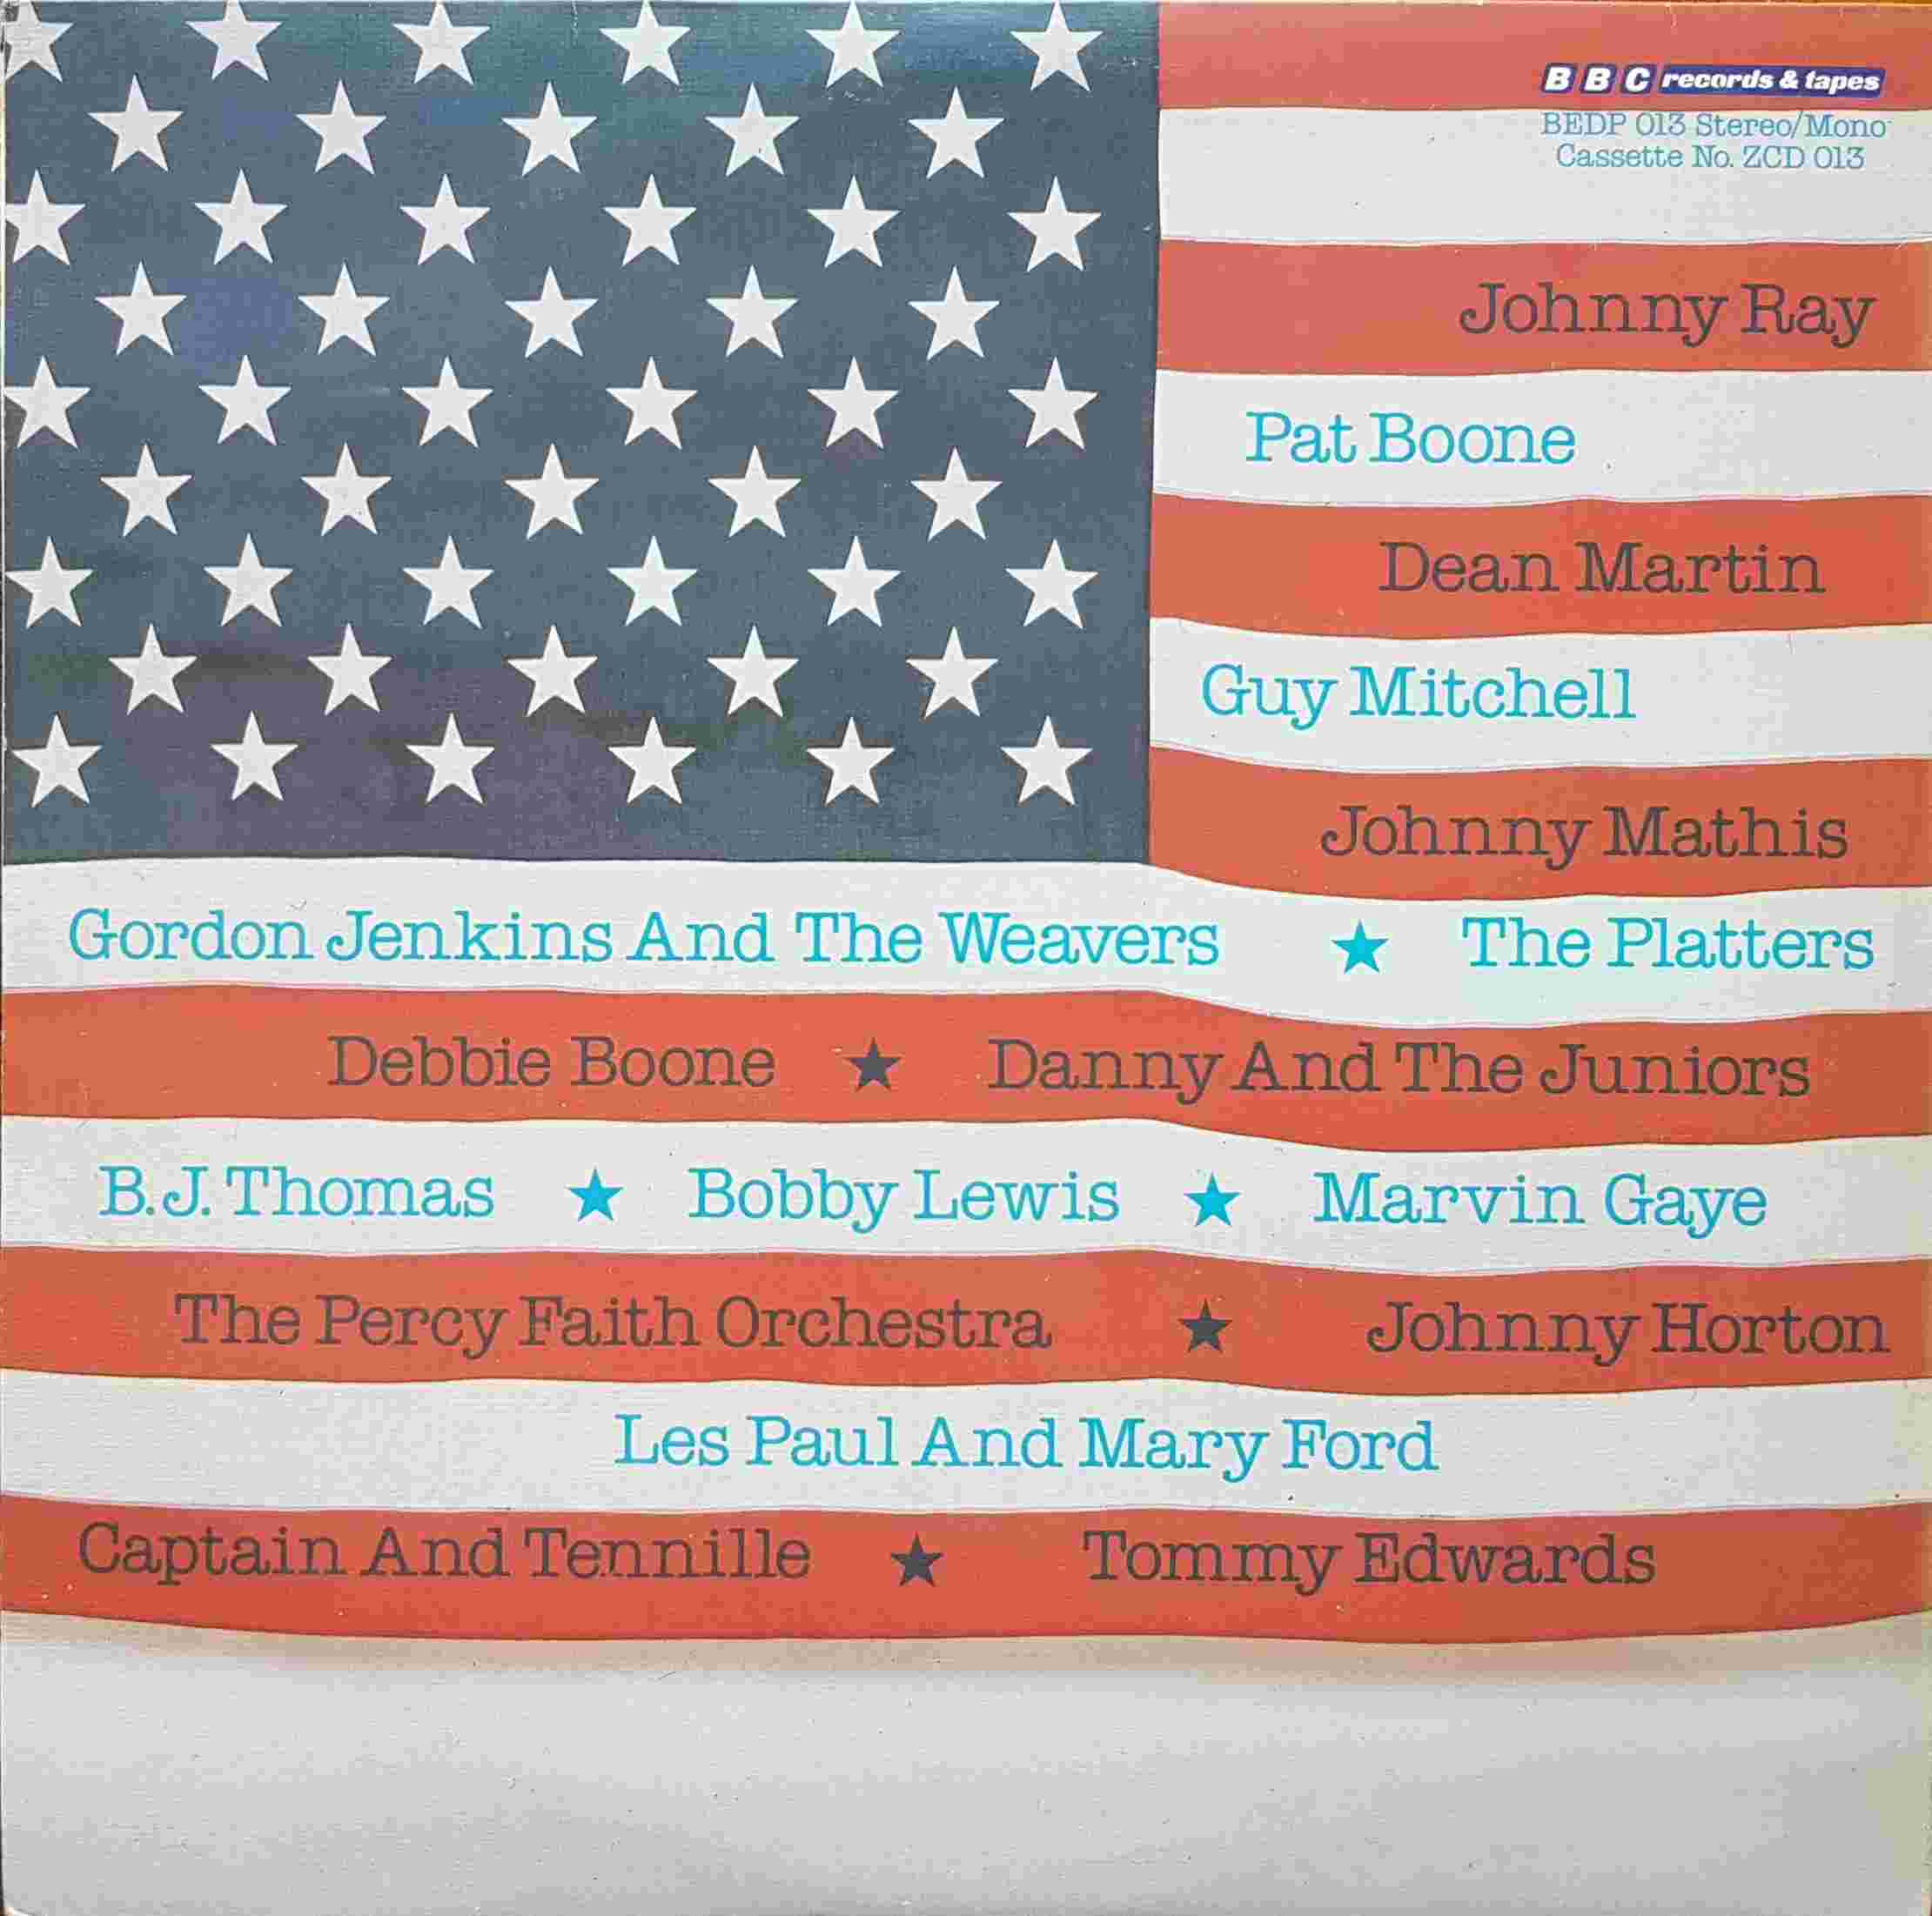 Picture of BEDP 013 America's greatest hits by artist Various from the BBC records and Tapes library